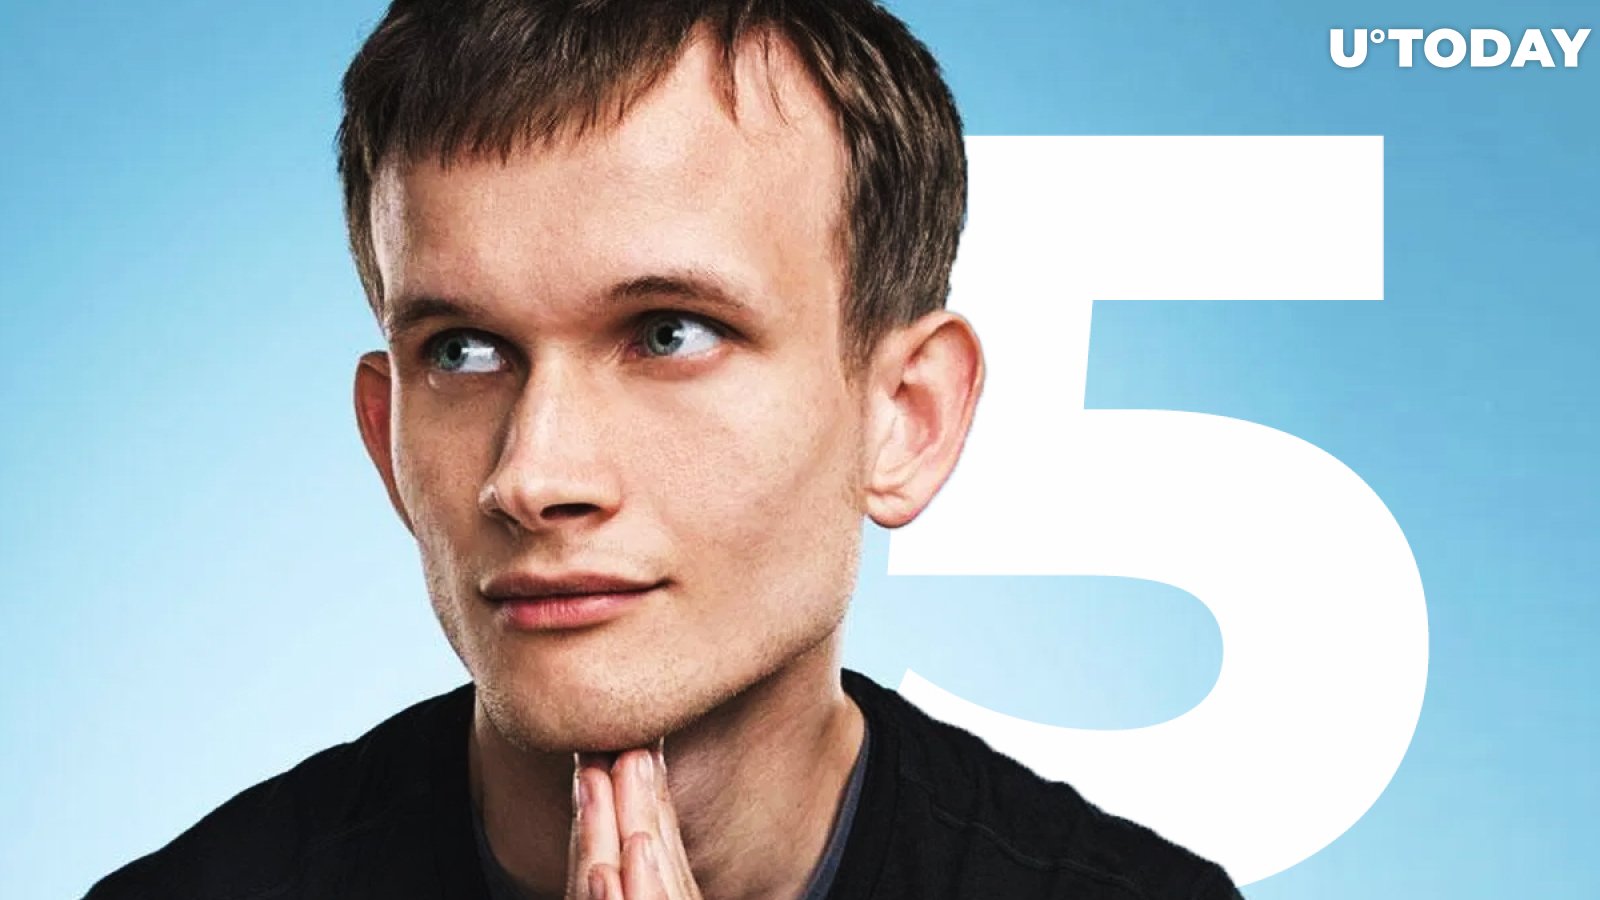 Ethereum Turns Five. Here’s What Vitalik Buterin Expects to Happen in Next Five Years